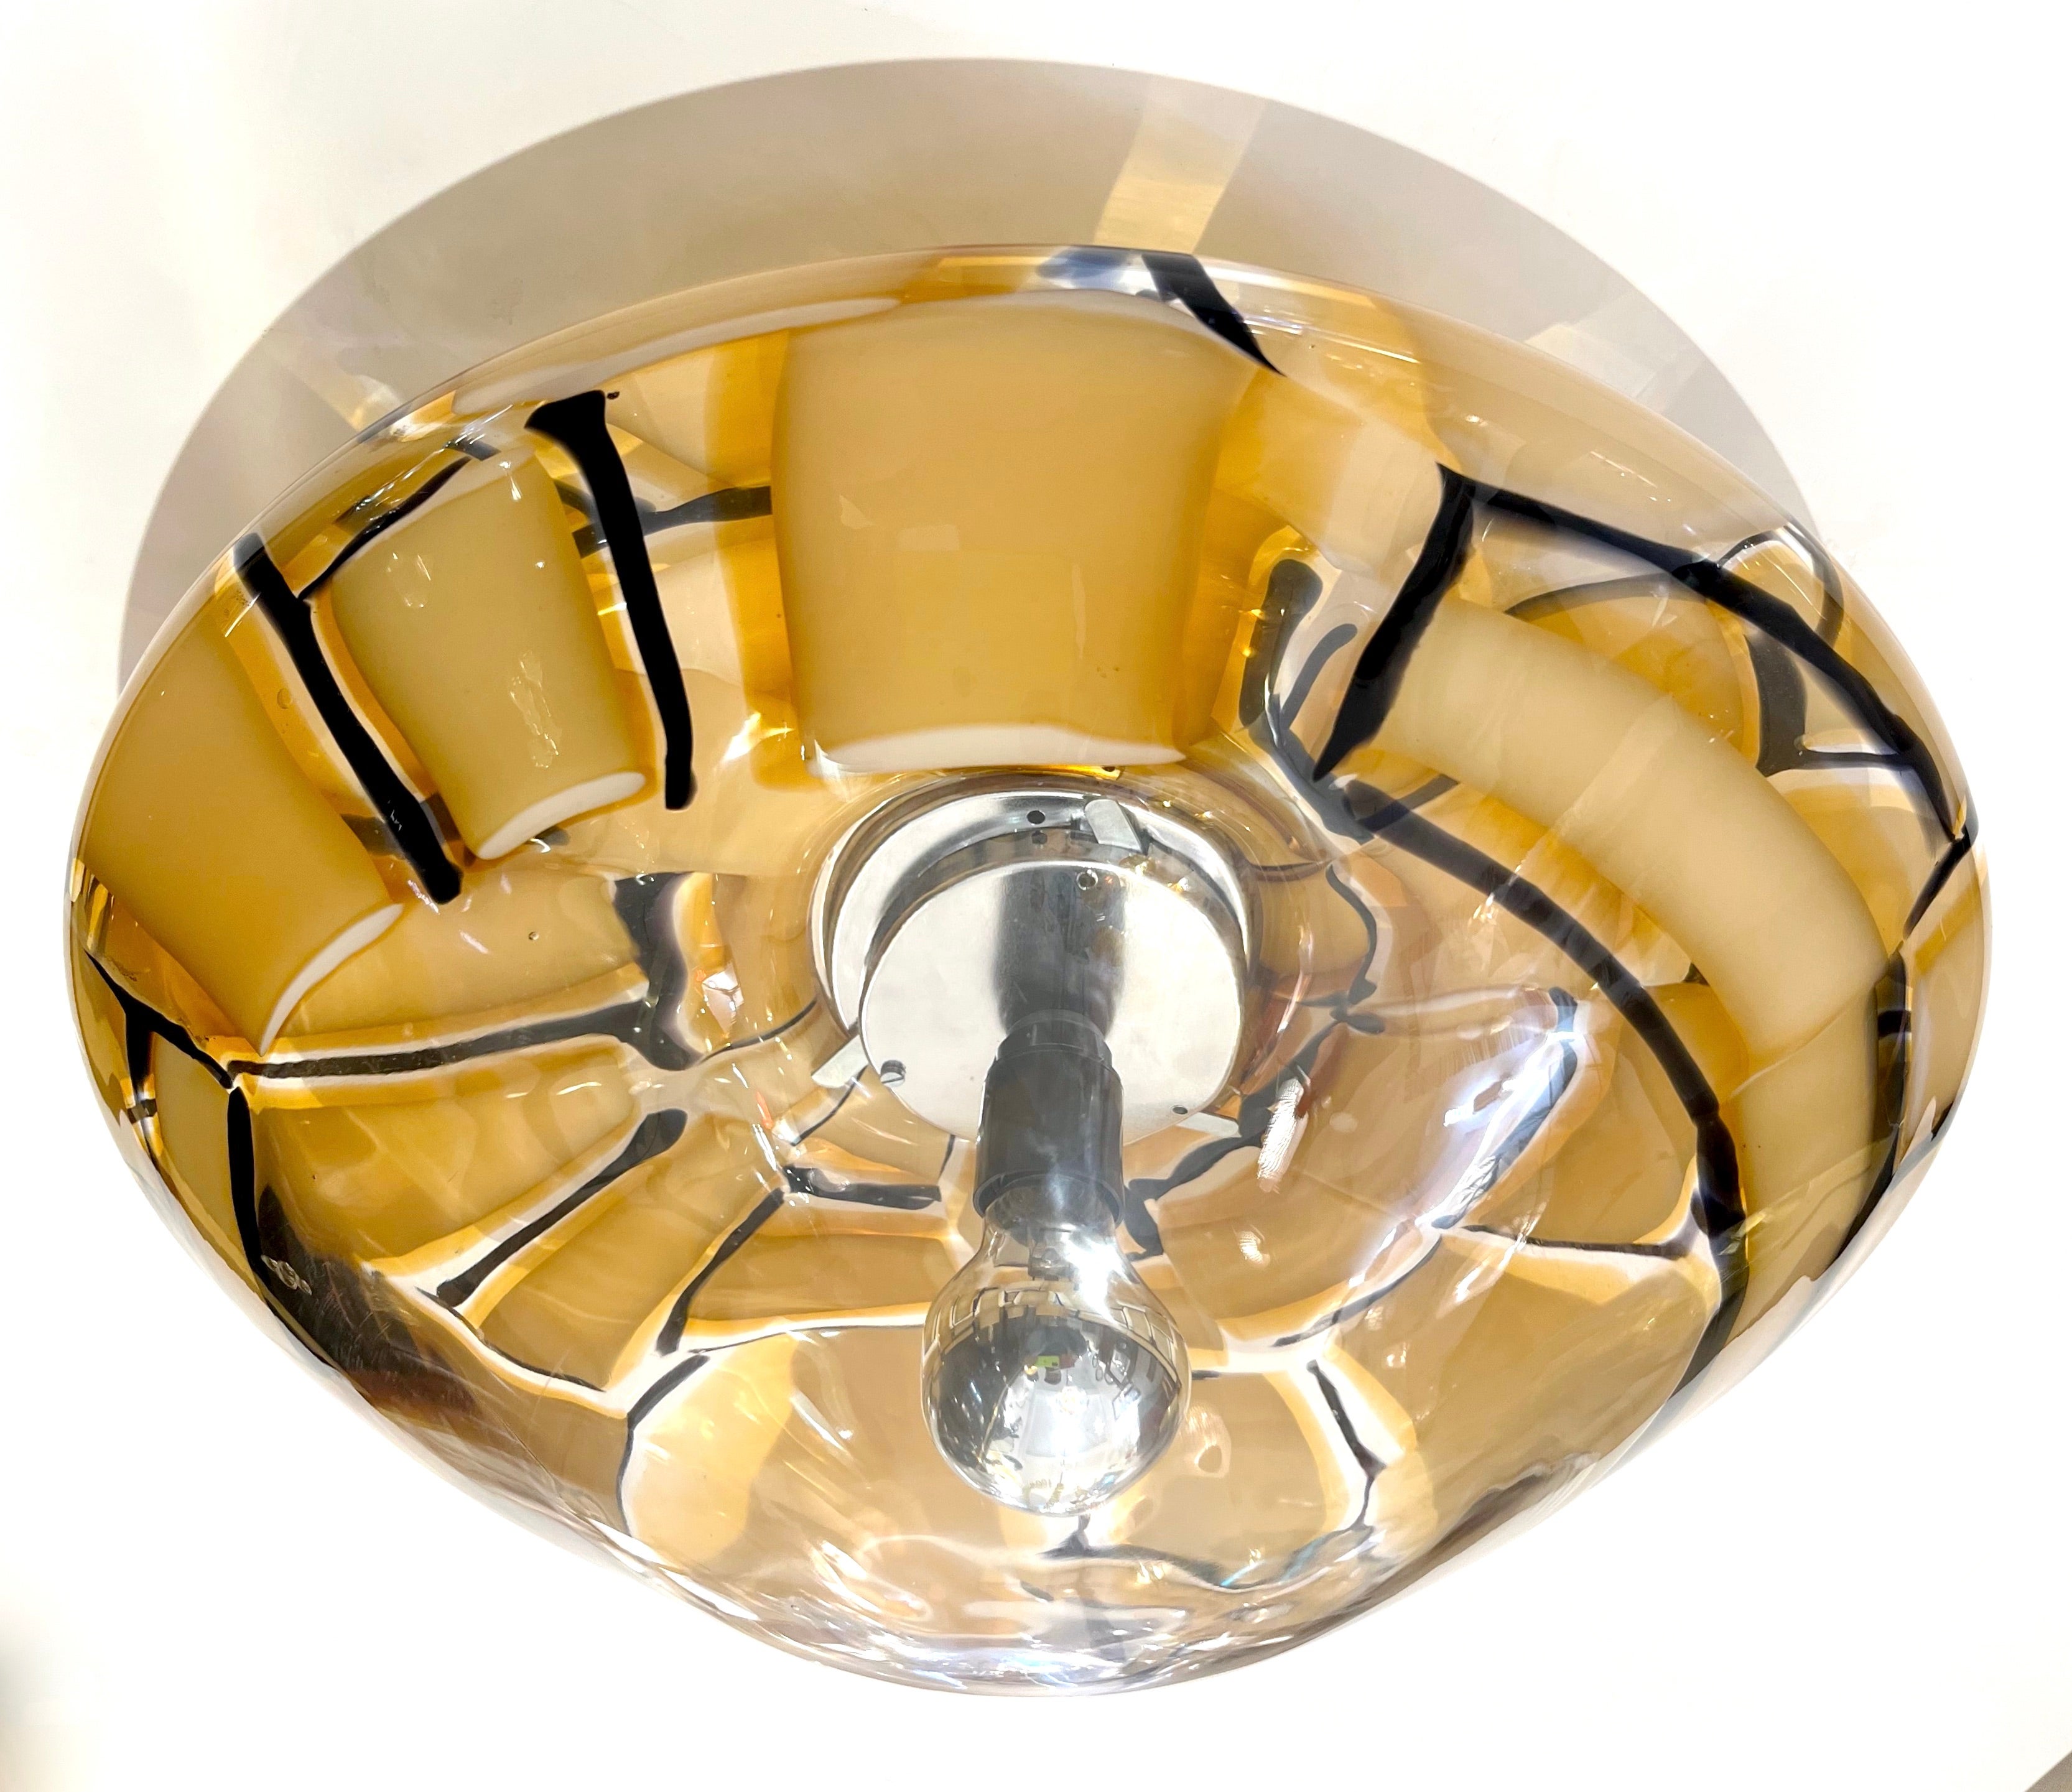 A rare 1970s Italian light fixture by Ercole Barovier that can be flush mount or wall light and in excellent original condition. The polished nickel backplate supports a blown crystal clear Murano glass round shade of organic feel, worked 